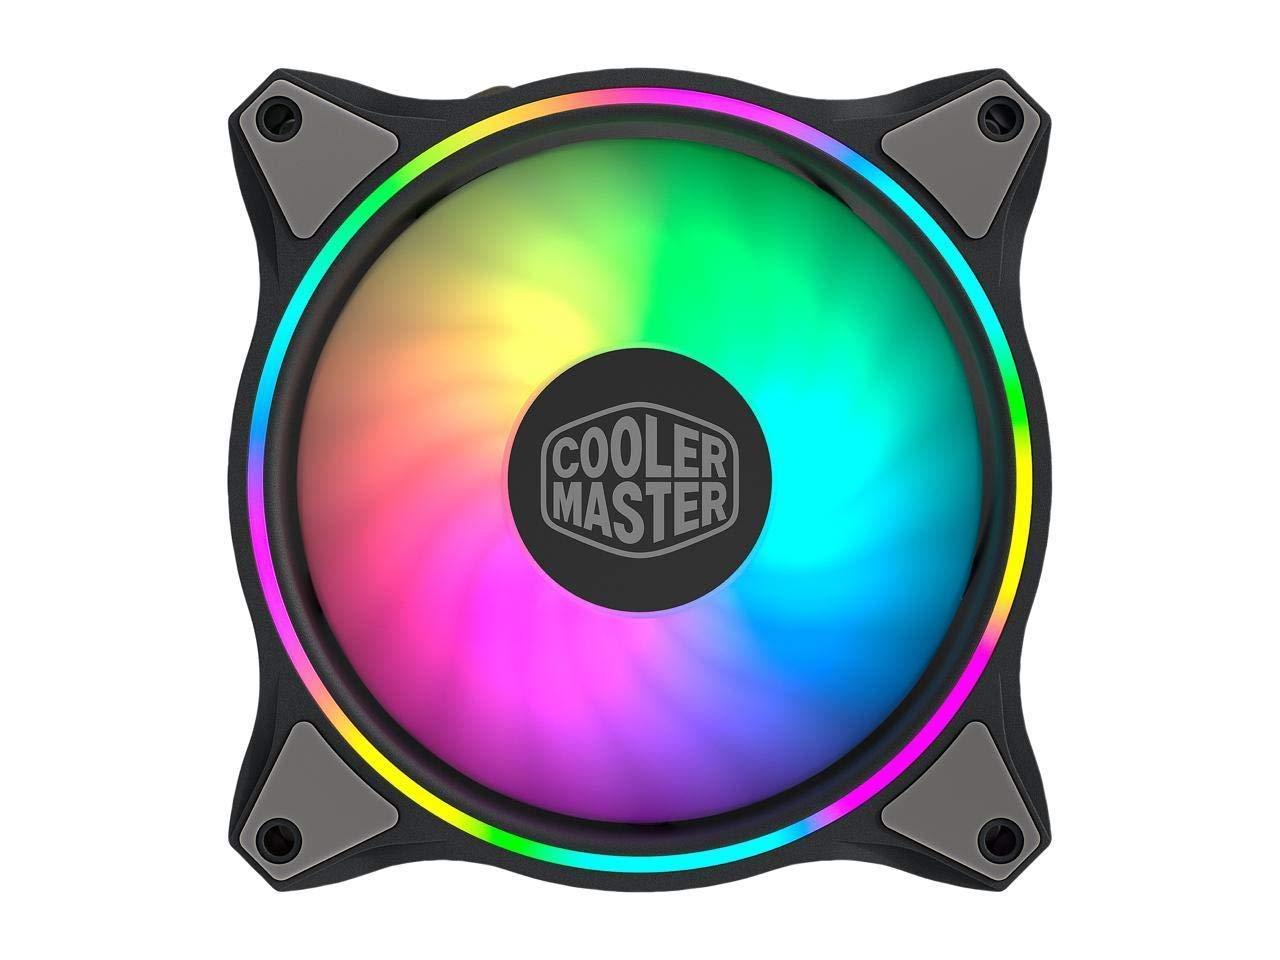 Toptekits 3-in-1 Cooler Master Fan MF120 Halo Duo-Ring Addressable RGB Lighting 120mm -Controlled LED - Store For Gamers